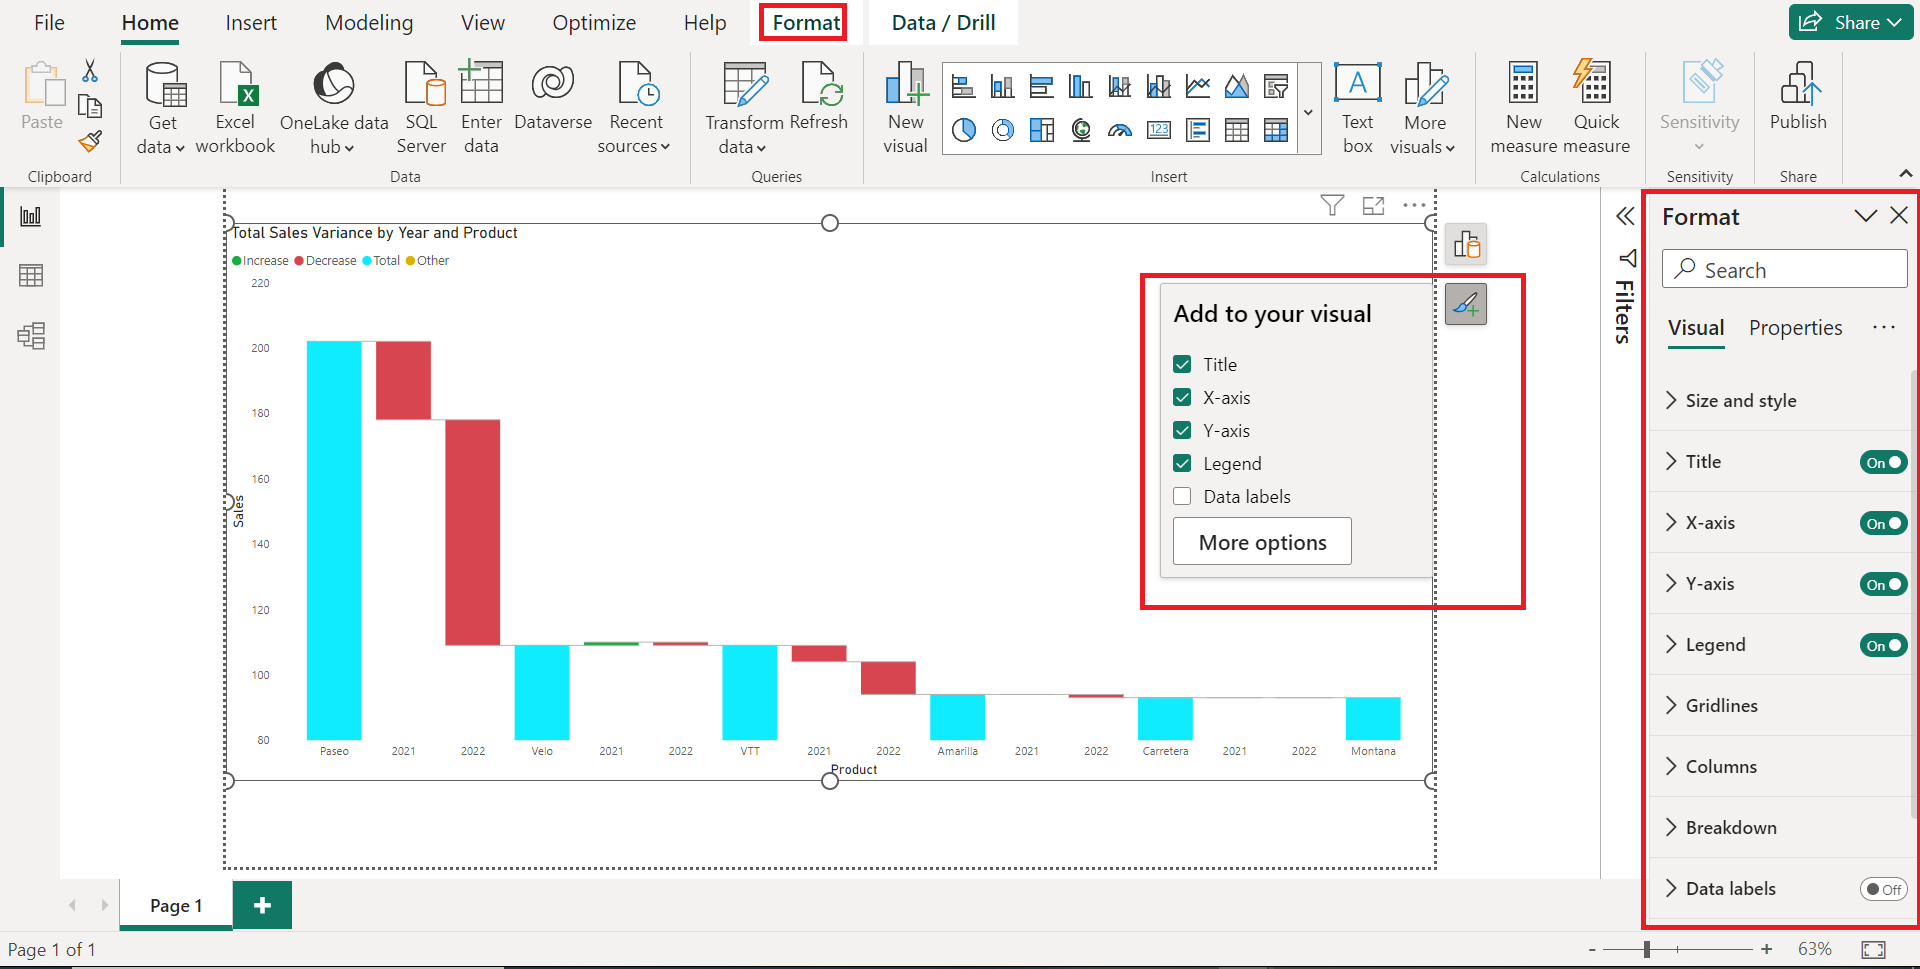 Format your waterfall charts so they automatically convert sequential data